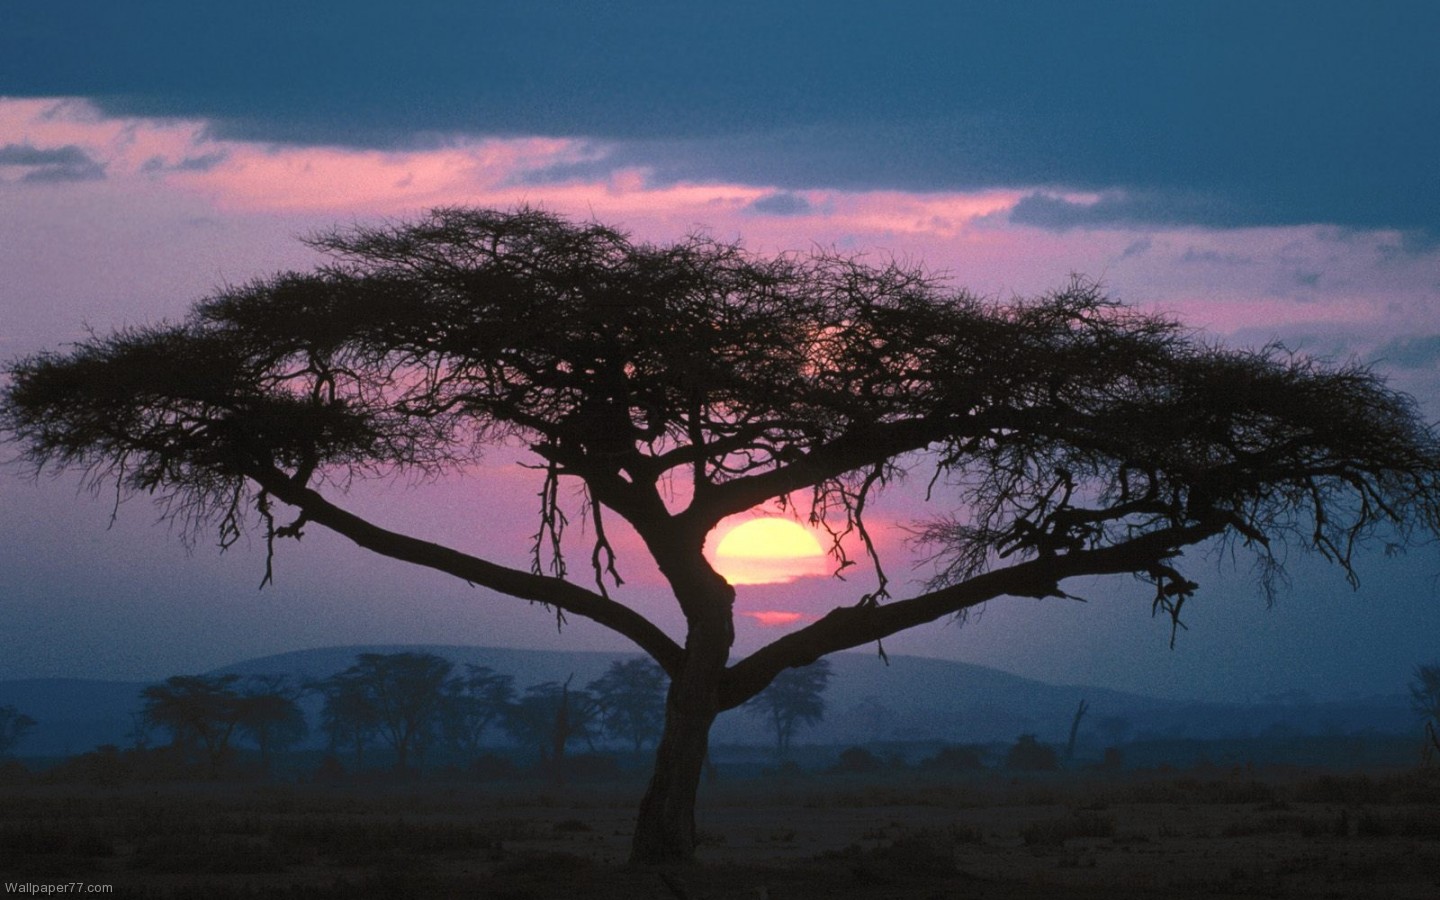 East African Sunset, 1440x900 pixels : Wallpapers tagged Landscape.